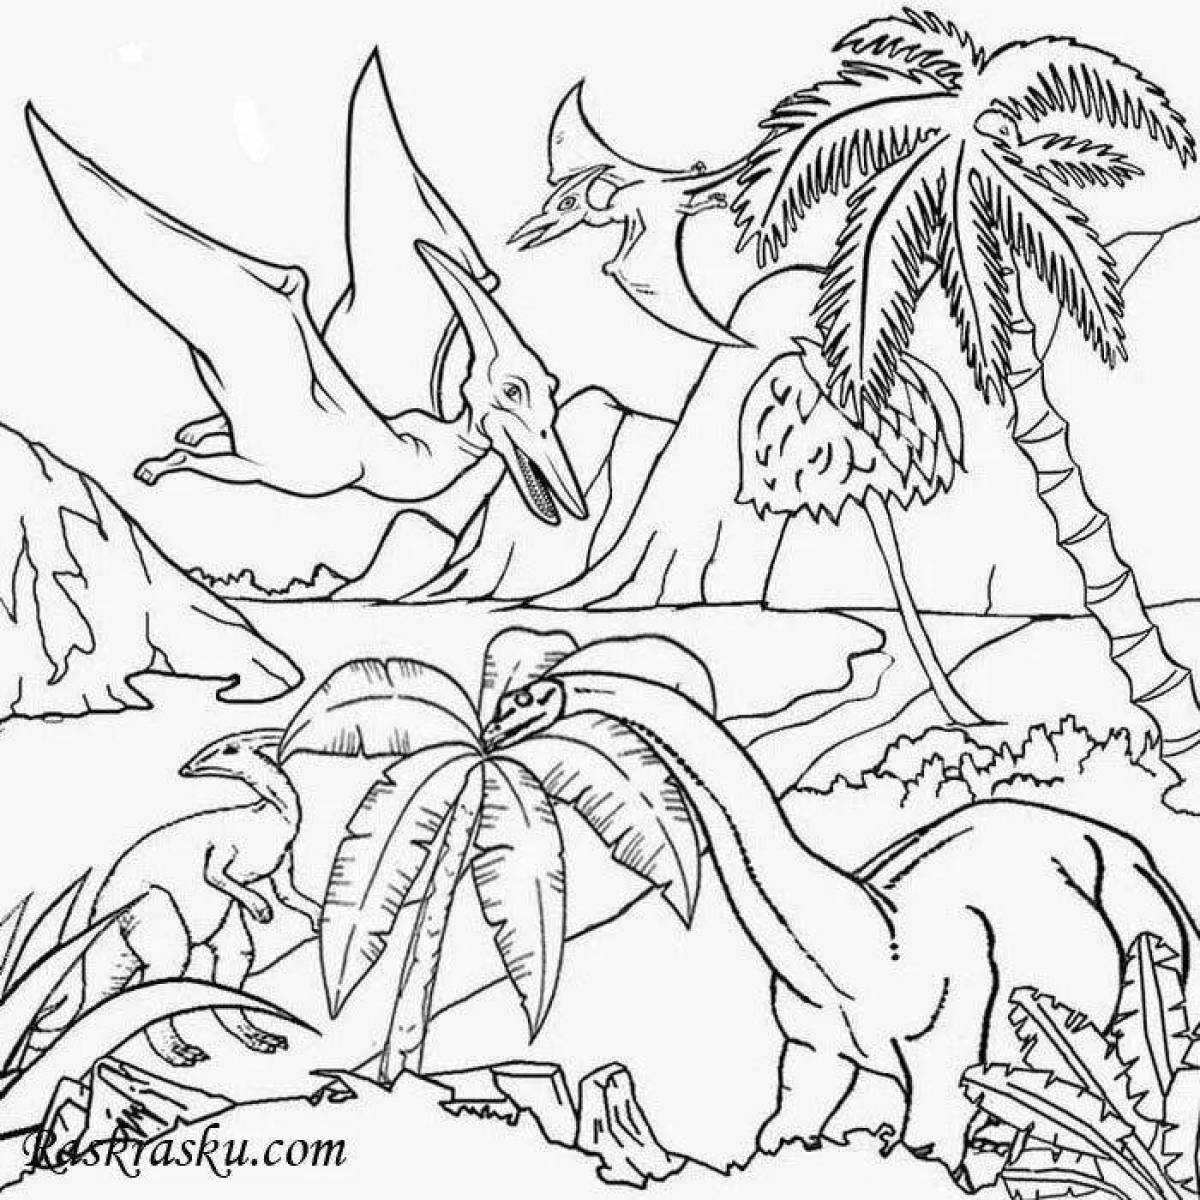 Dinosaur world exciting coloring book